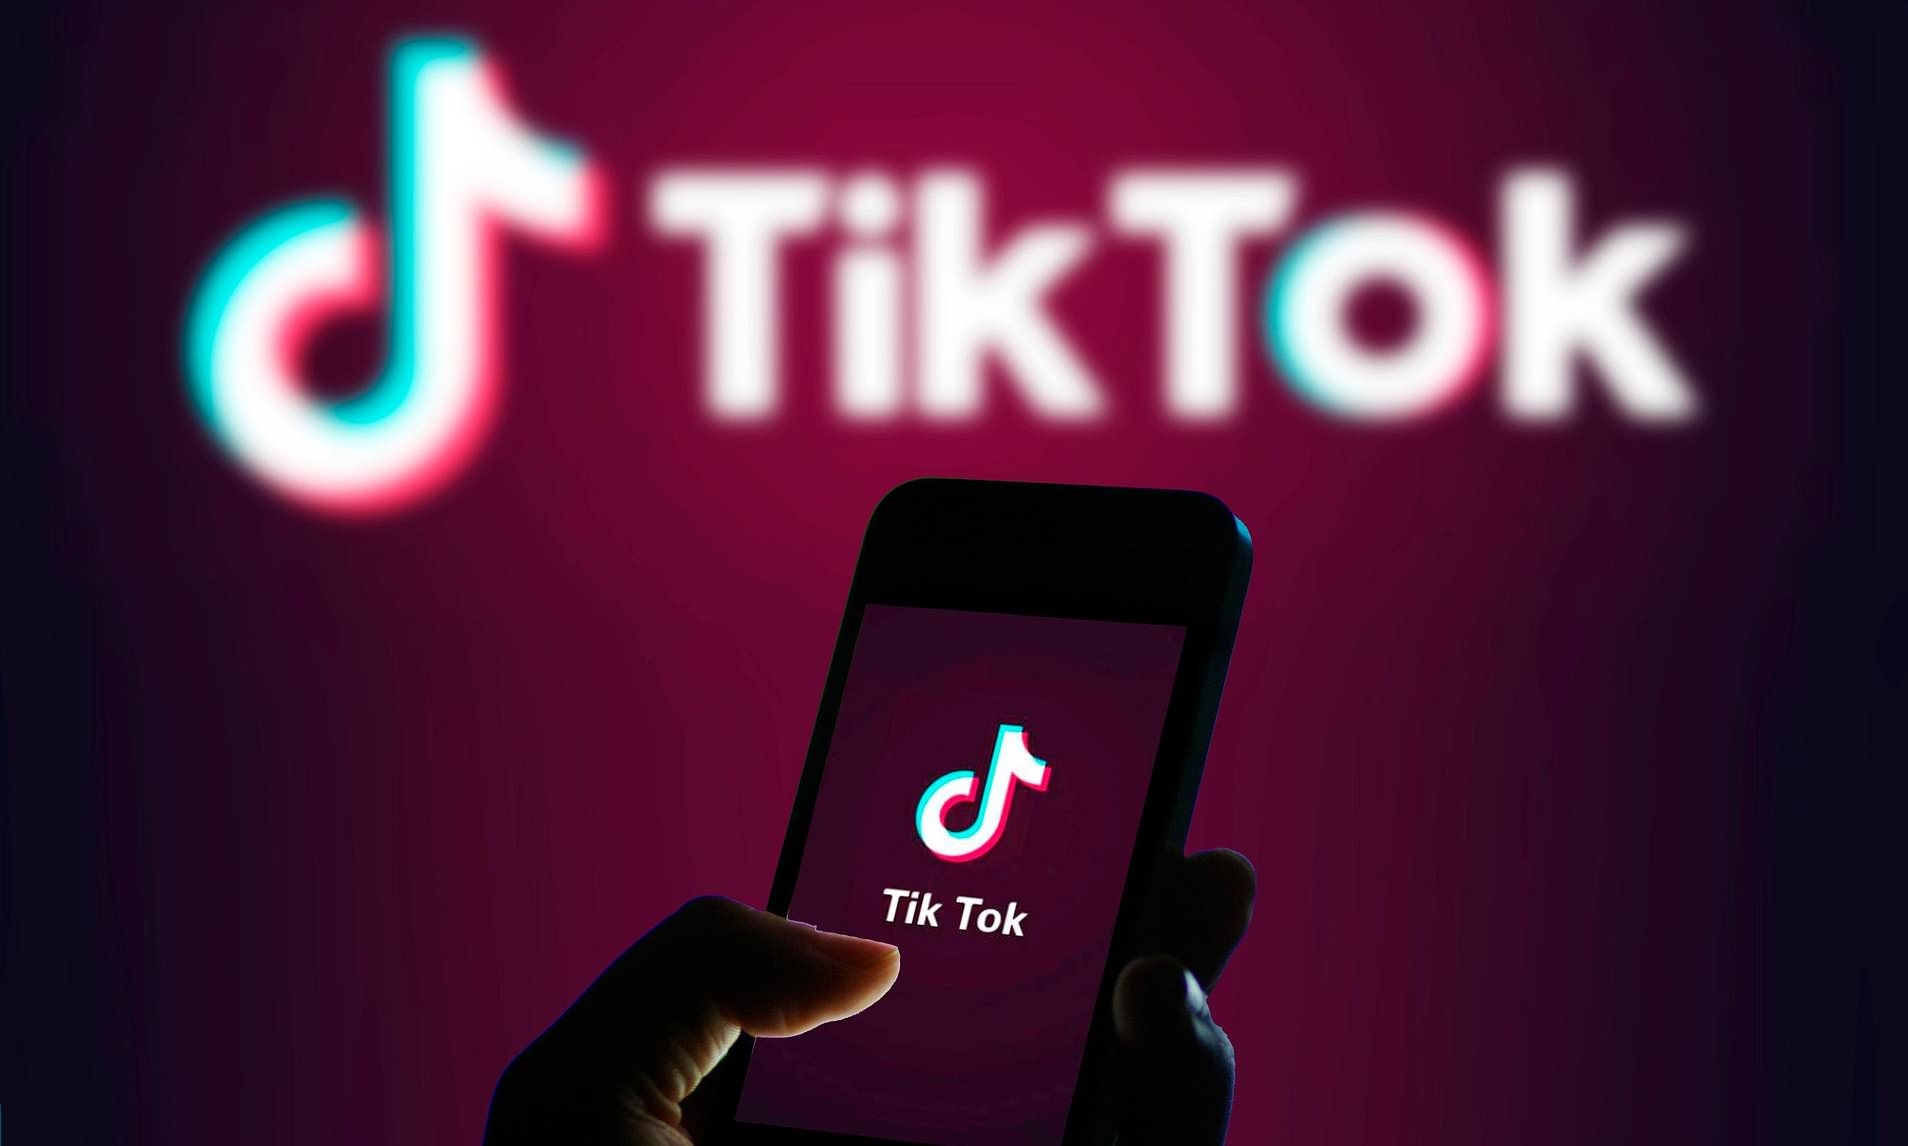 Twitter emerges as TikTok' new bidders over Donald Trump's pressure to force the sale